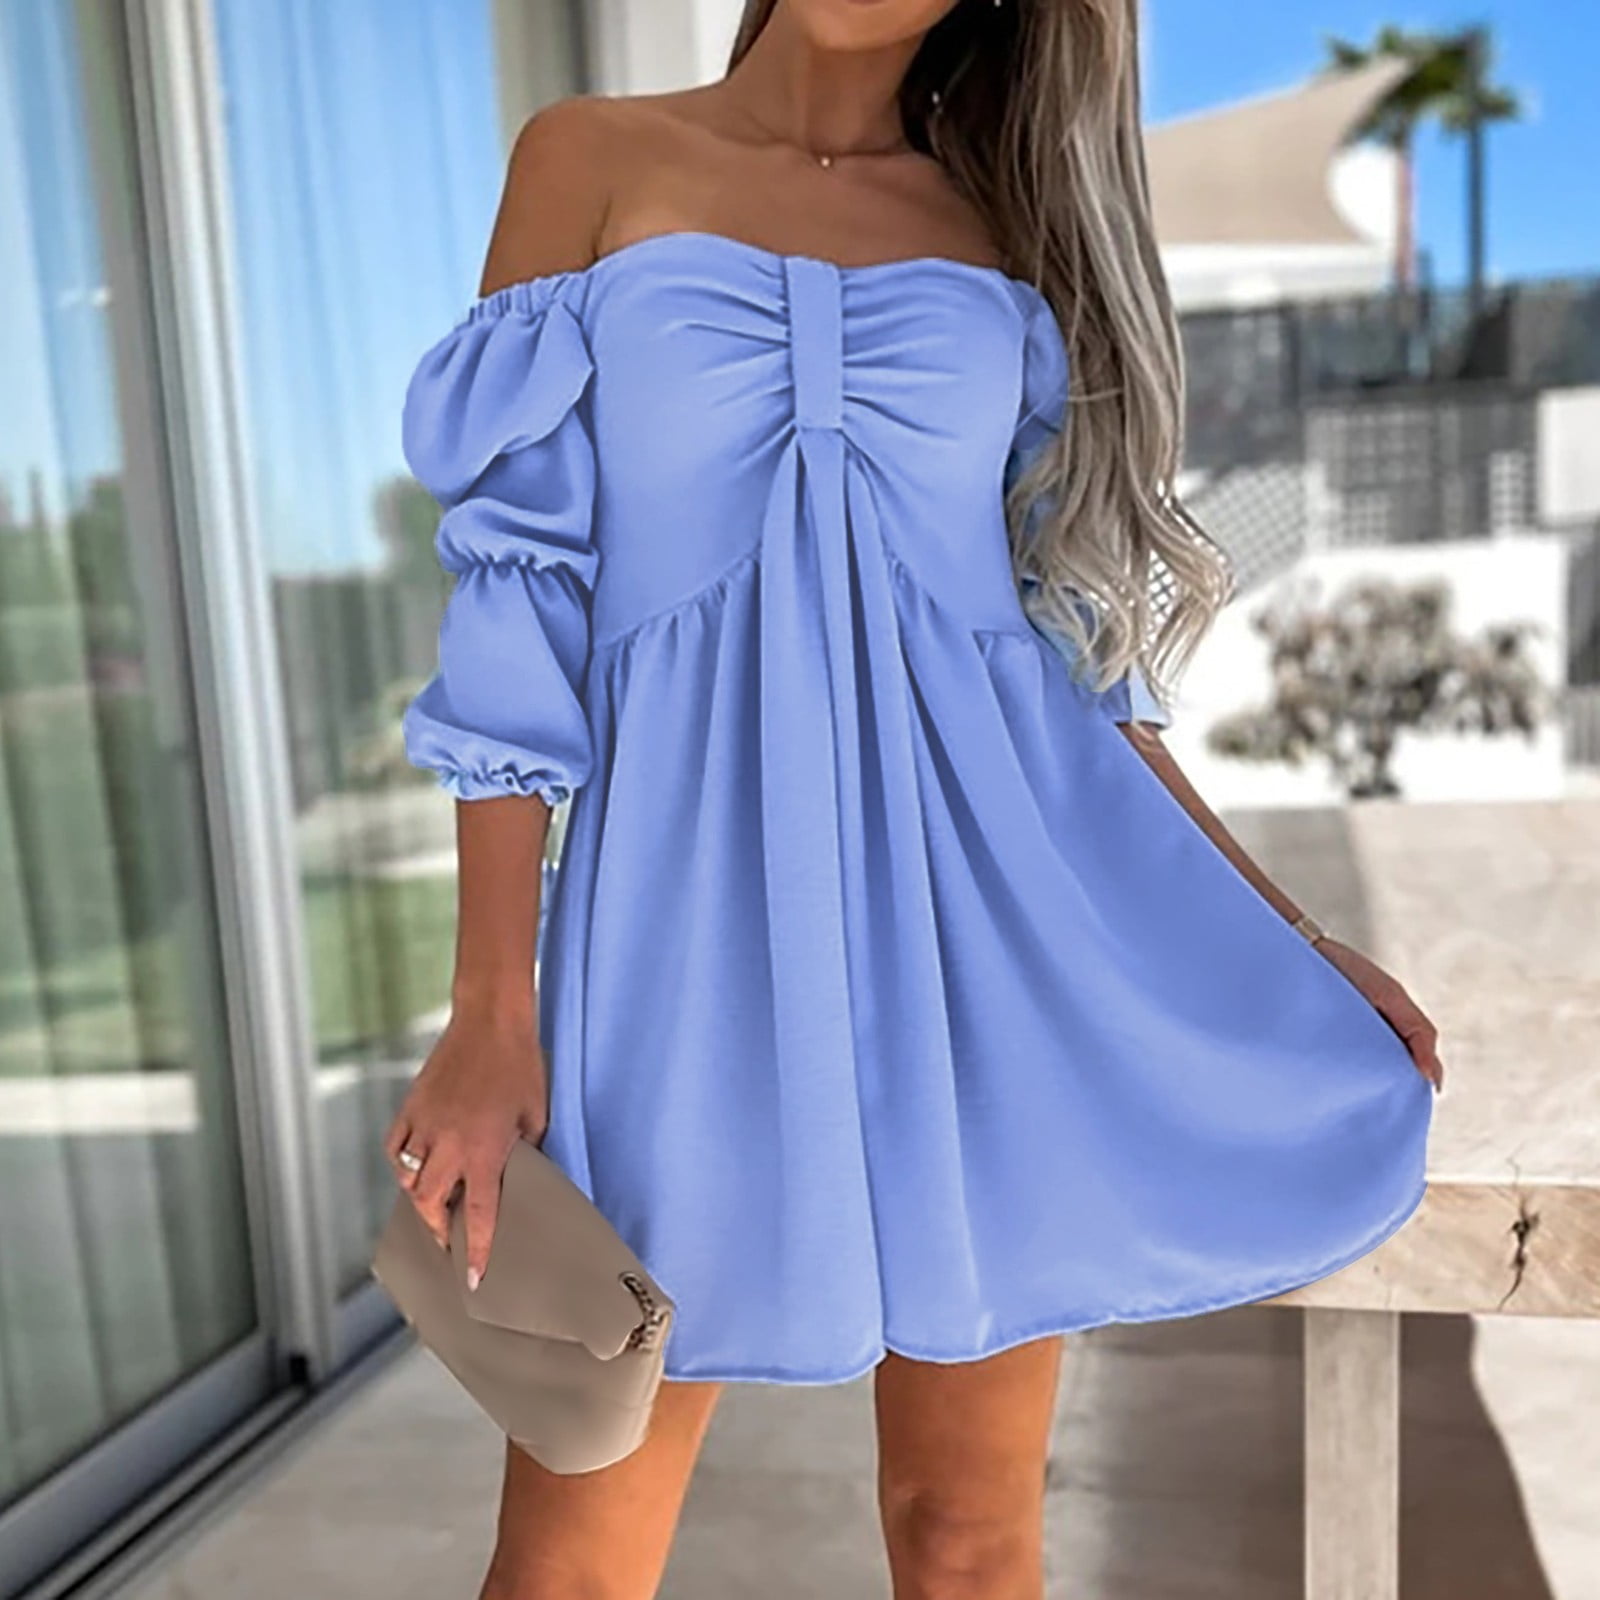 TRENDY NEW FASHION WESTERN TYPE FRILL DRESS FOR GIRLS AND WOMENS FROCK LOOK  DRESS .